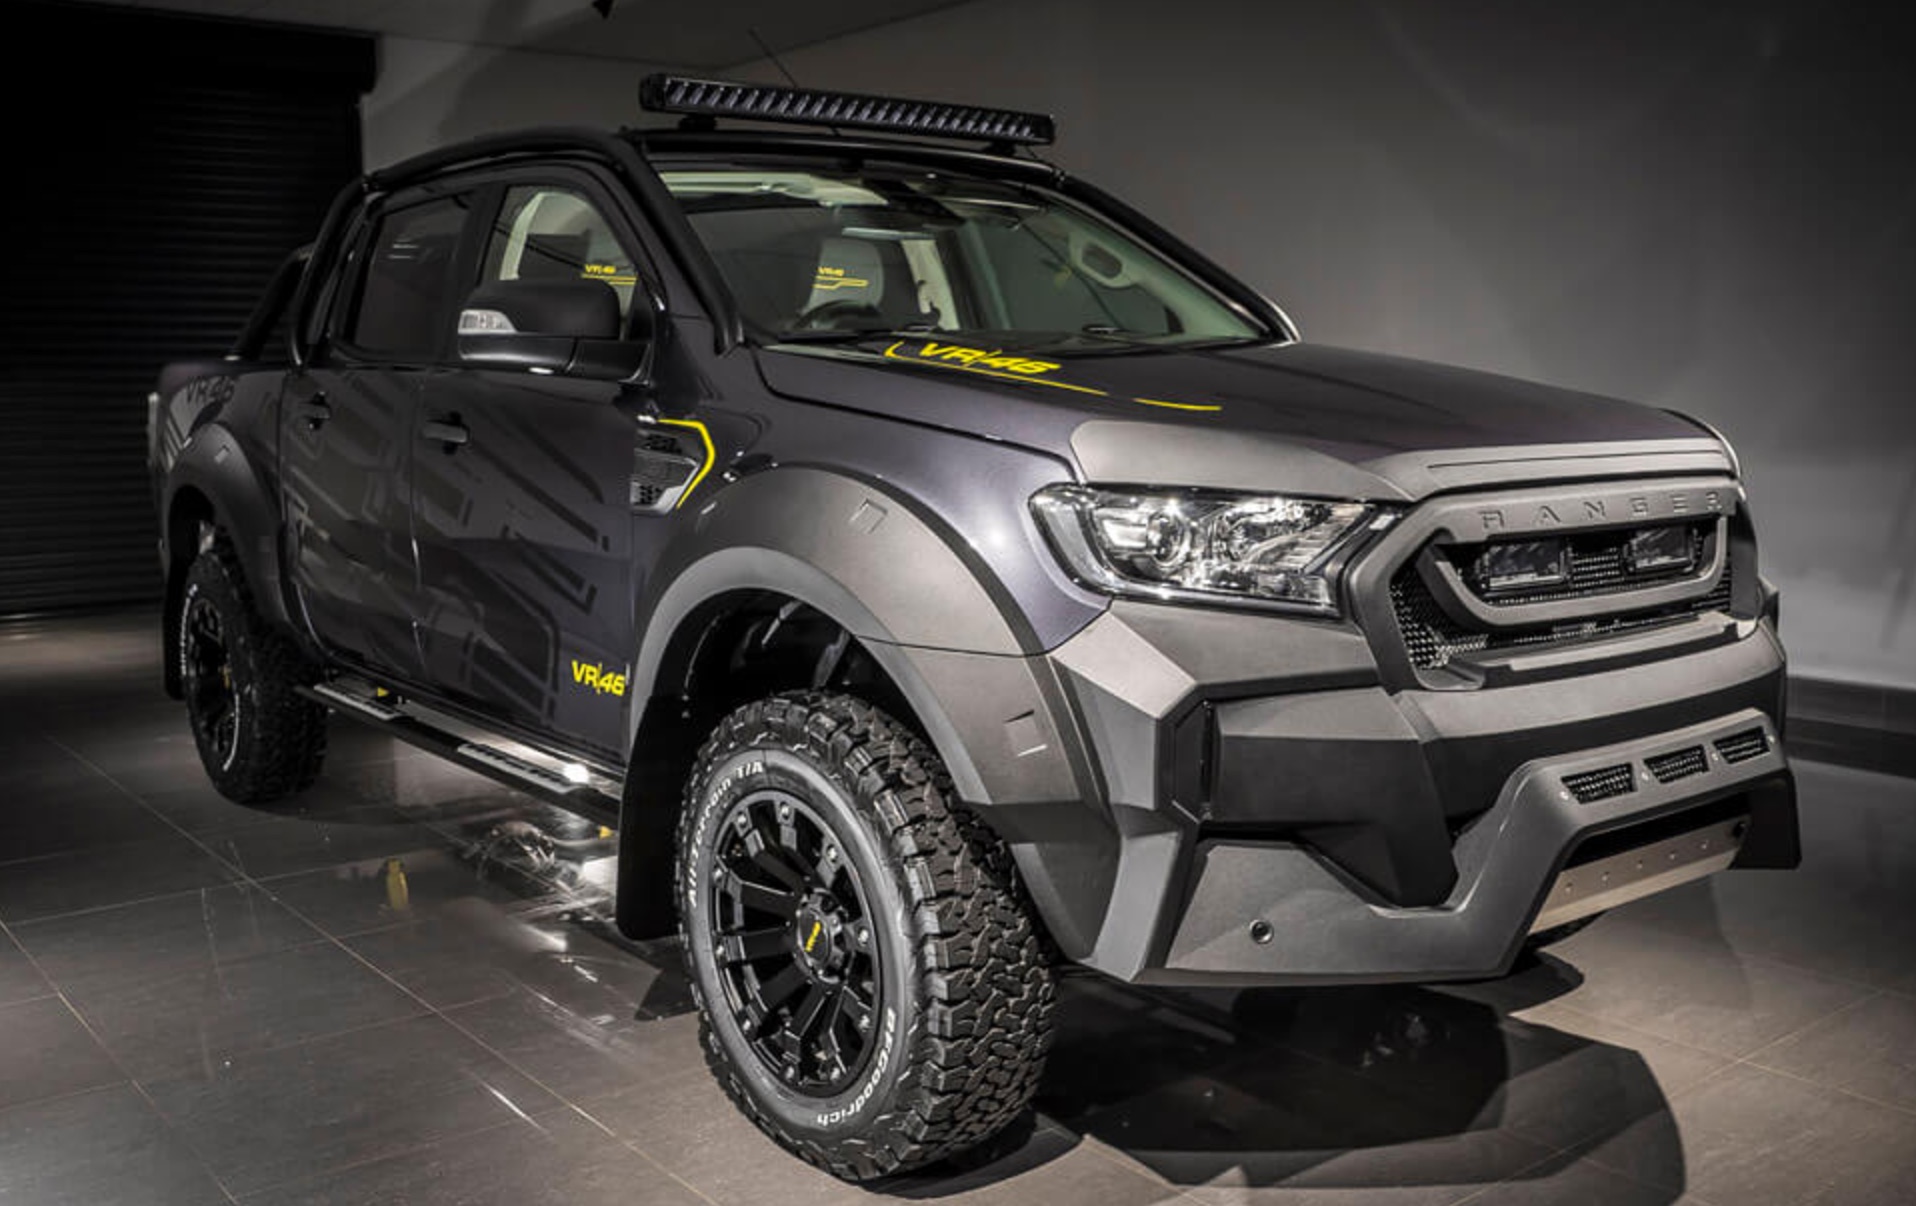 Valentino Rossi signs off on custom Ford Ranger